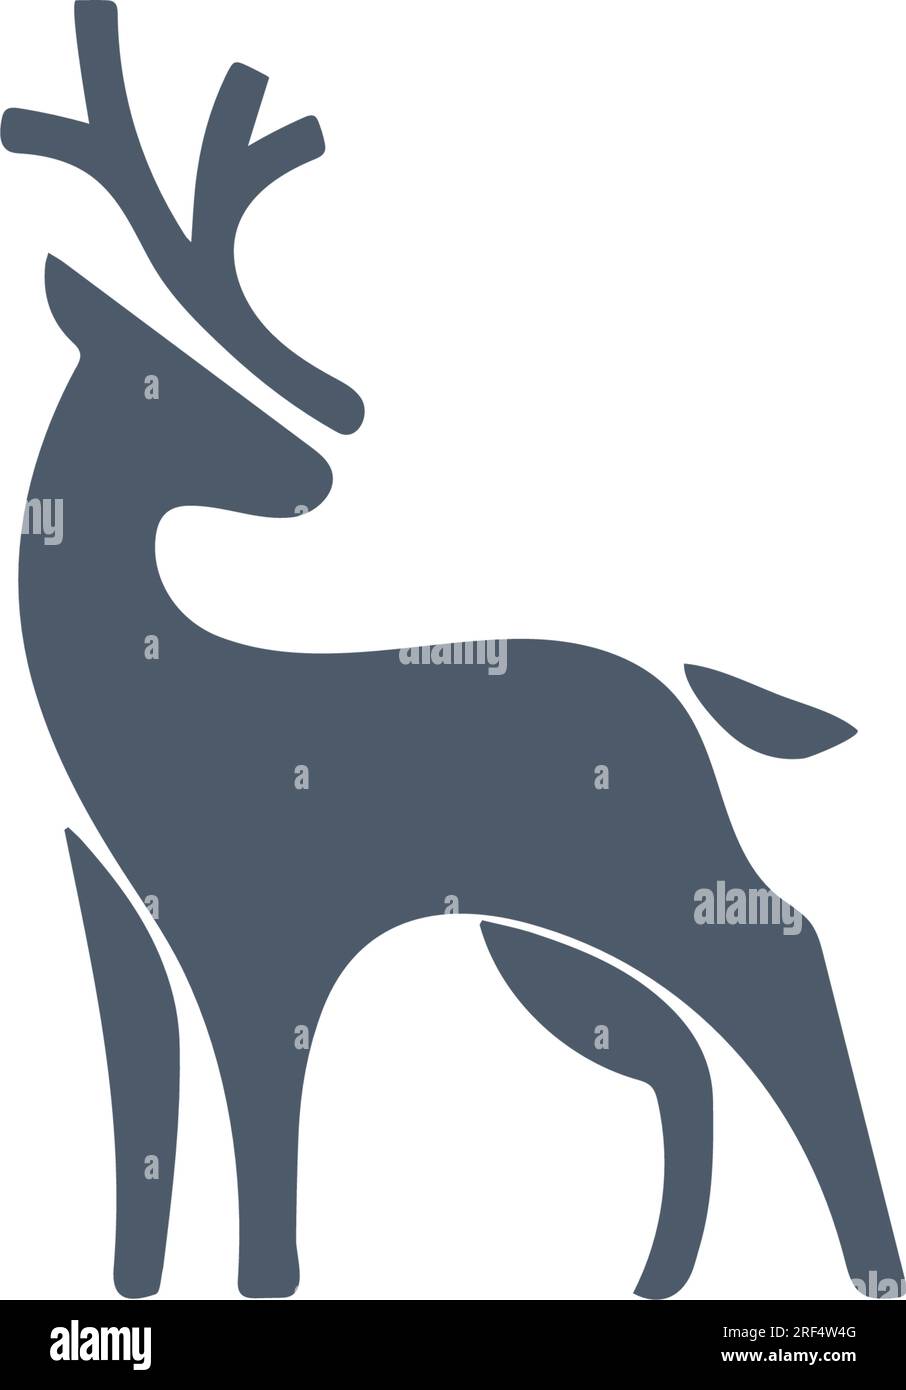 Abstract Deer with Unique shape and Illustration and Silhouette Stock Vector